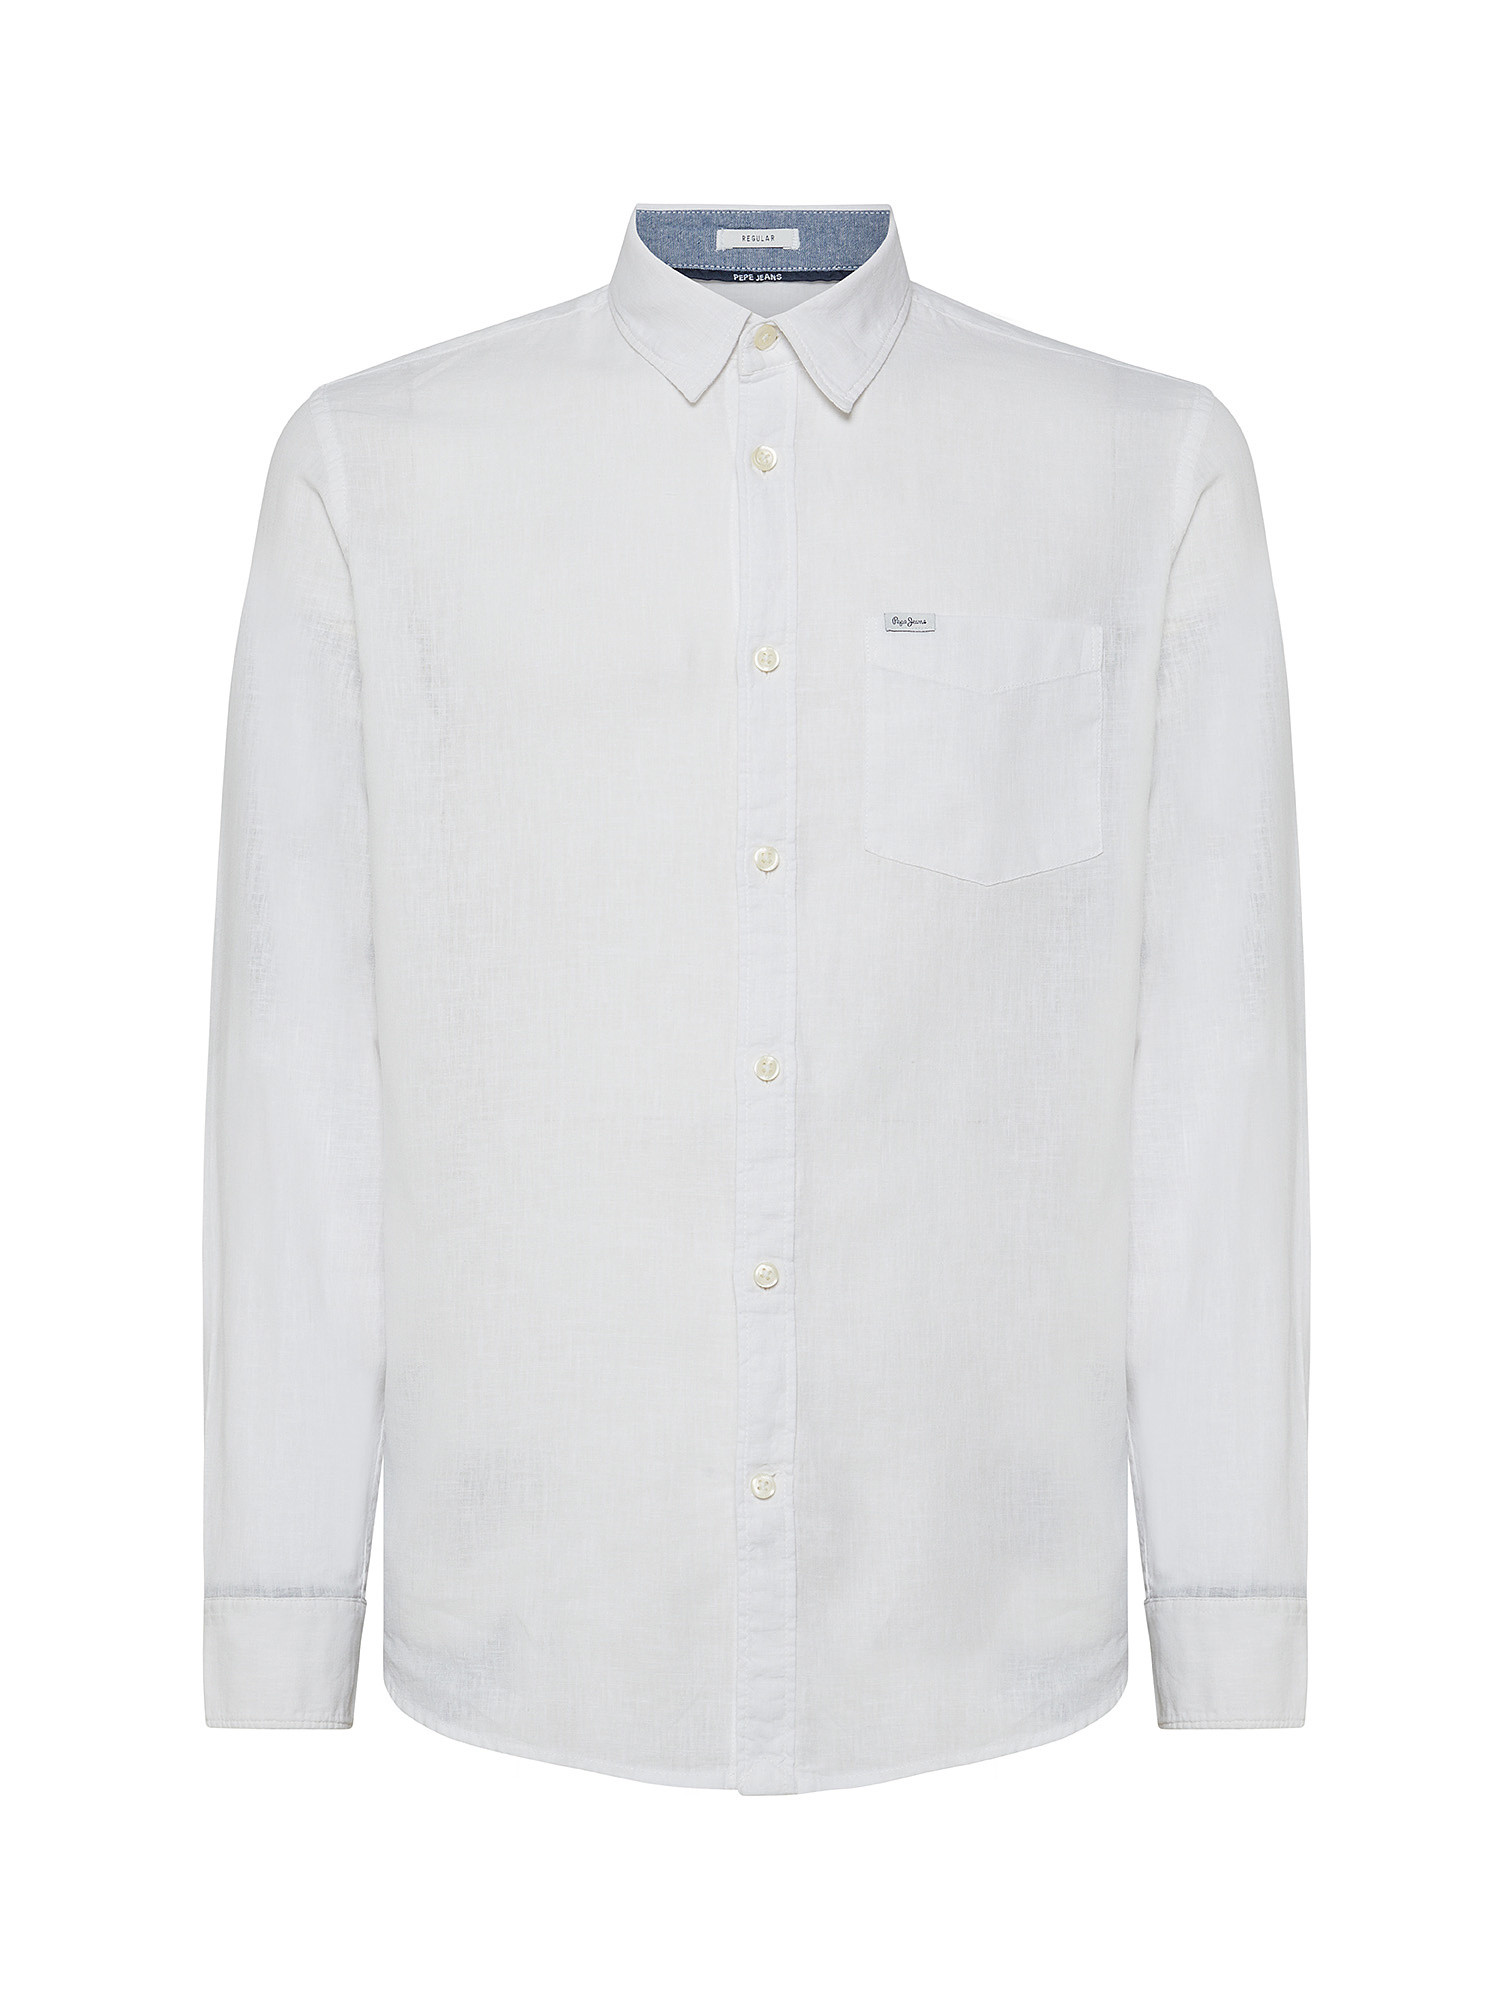 Pepe Jeans -  Camicia in misto lino, Bianco, large image number 1